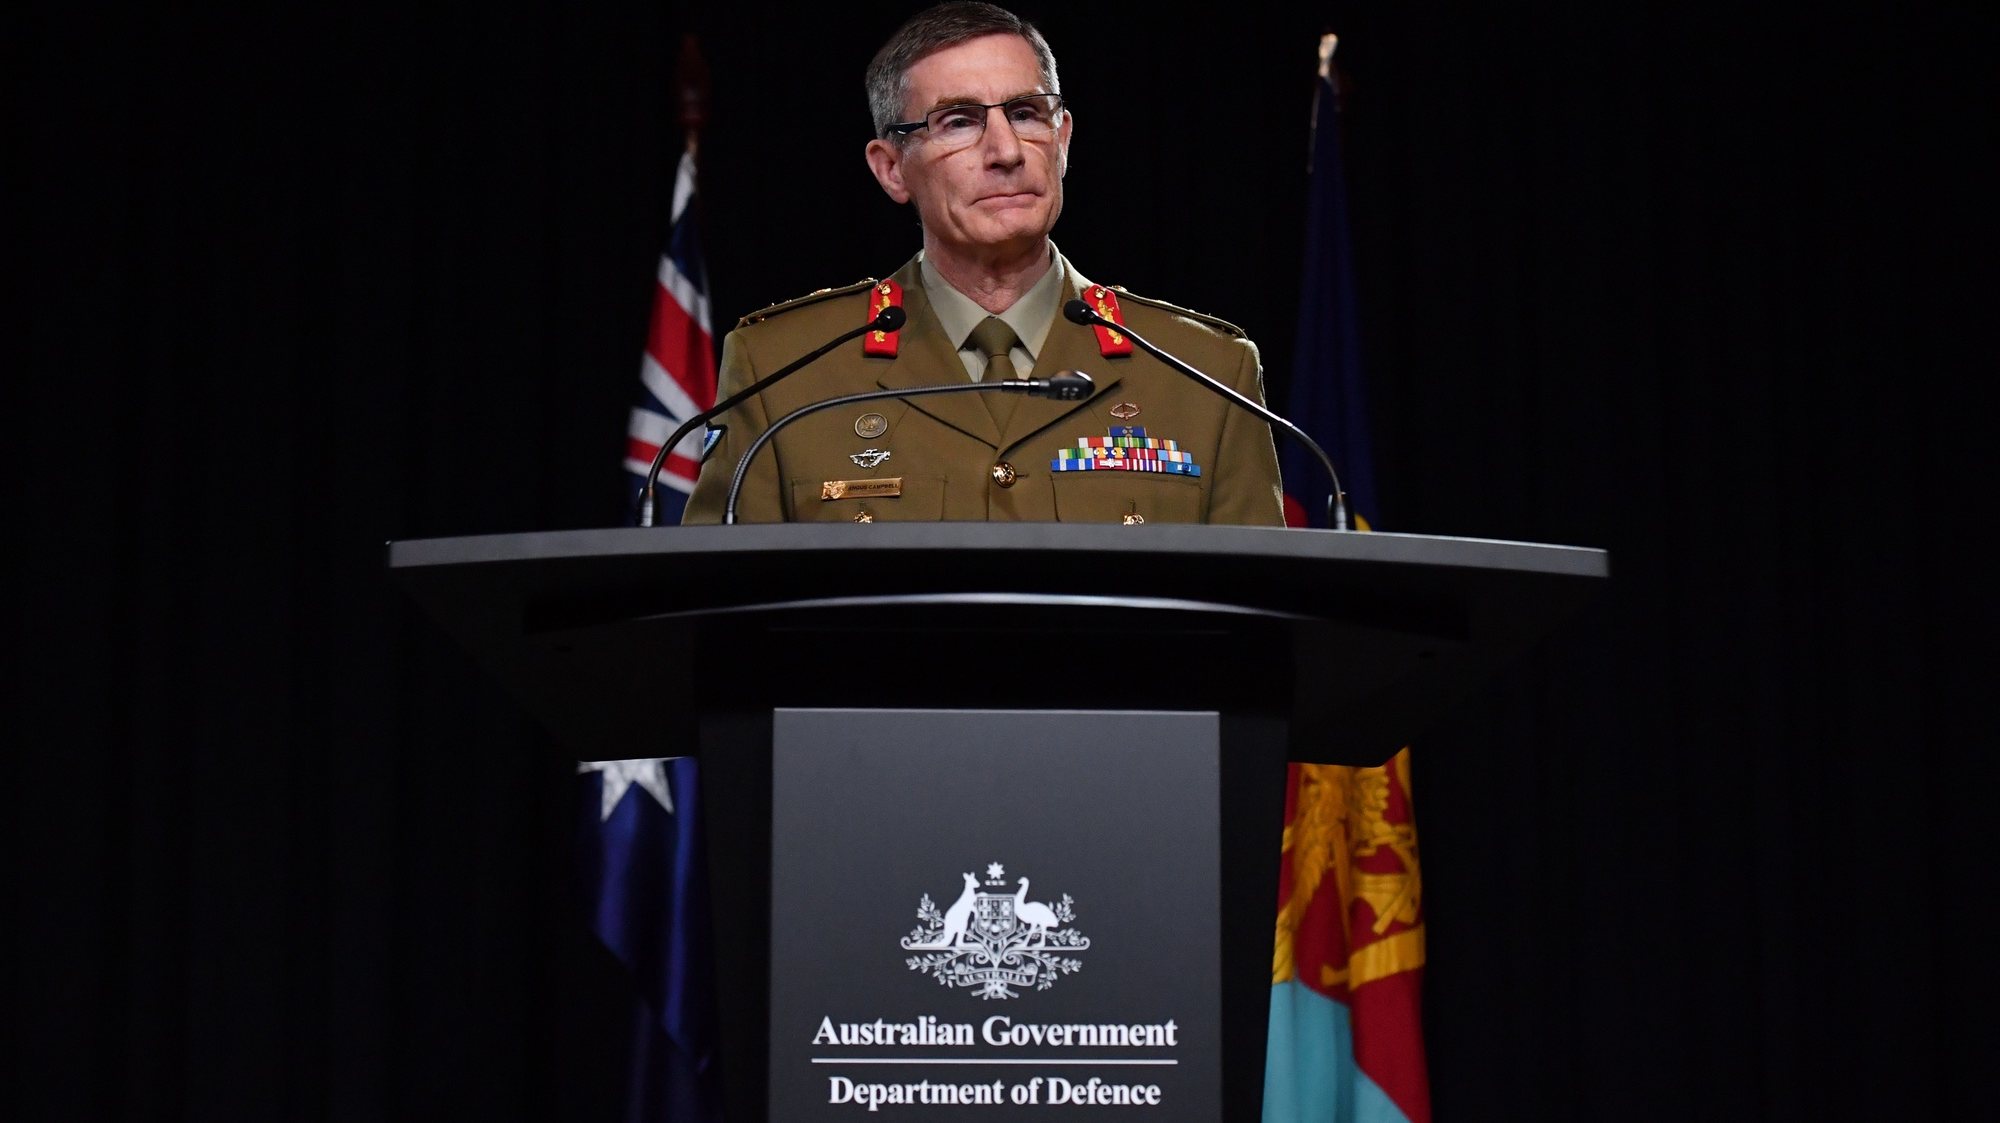 epa08828545 Chief of the Australian Defence Force (ADF) General Angus Campbell delivers the findings from the Inspector-General of the Australian Defence Force Afghanistan Inquiry, in Canberra, Australia, 19 November 2020. A landmark report has shed light on alleged war crimes by Australian troops serving in Afghanistan.  EPA/MICK TASIKAS AUSTRALIA AND NEW ZEALAND OUT